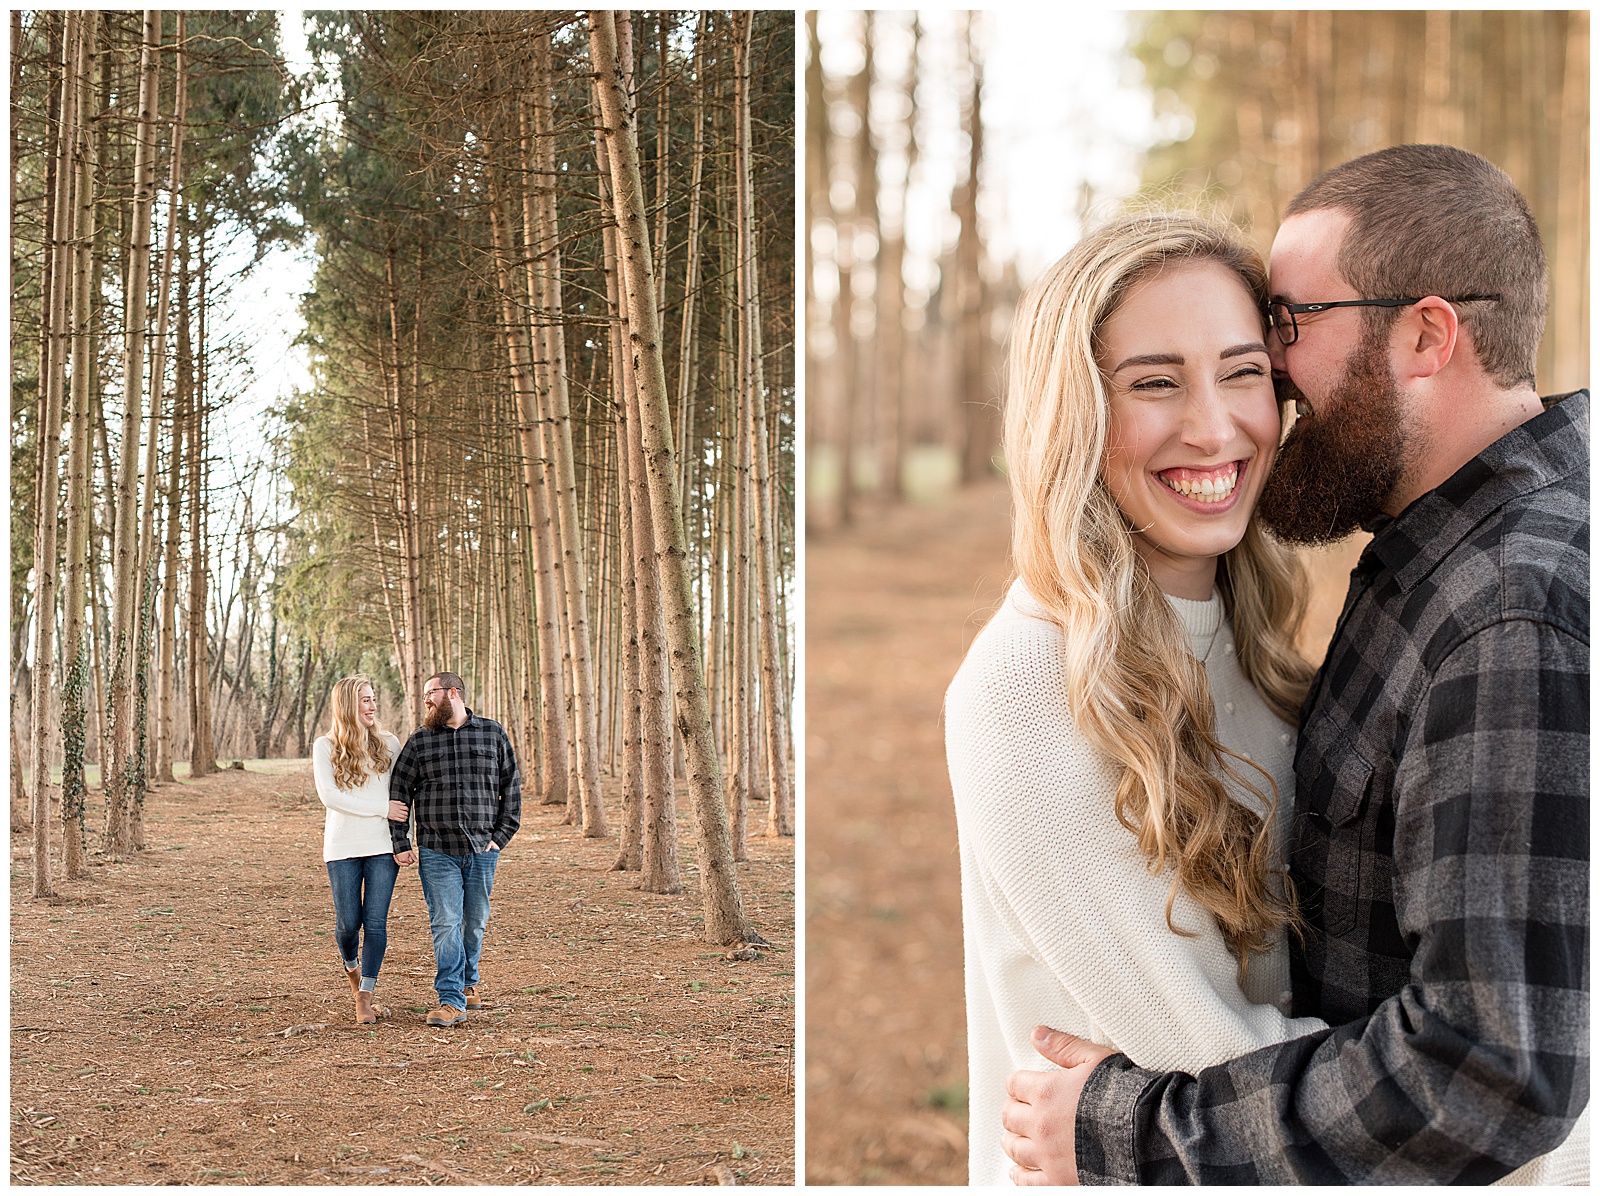 engagement session in a forest of pine trees, couple walking hand and hand